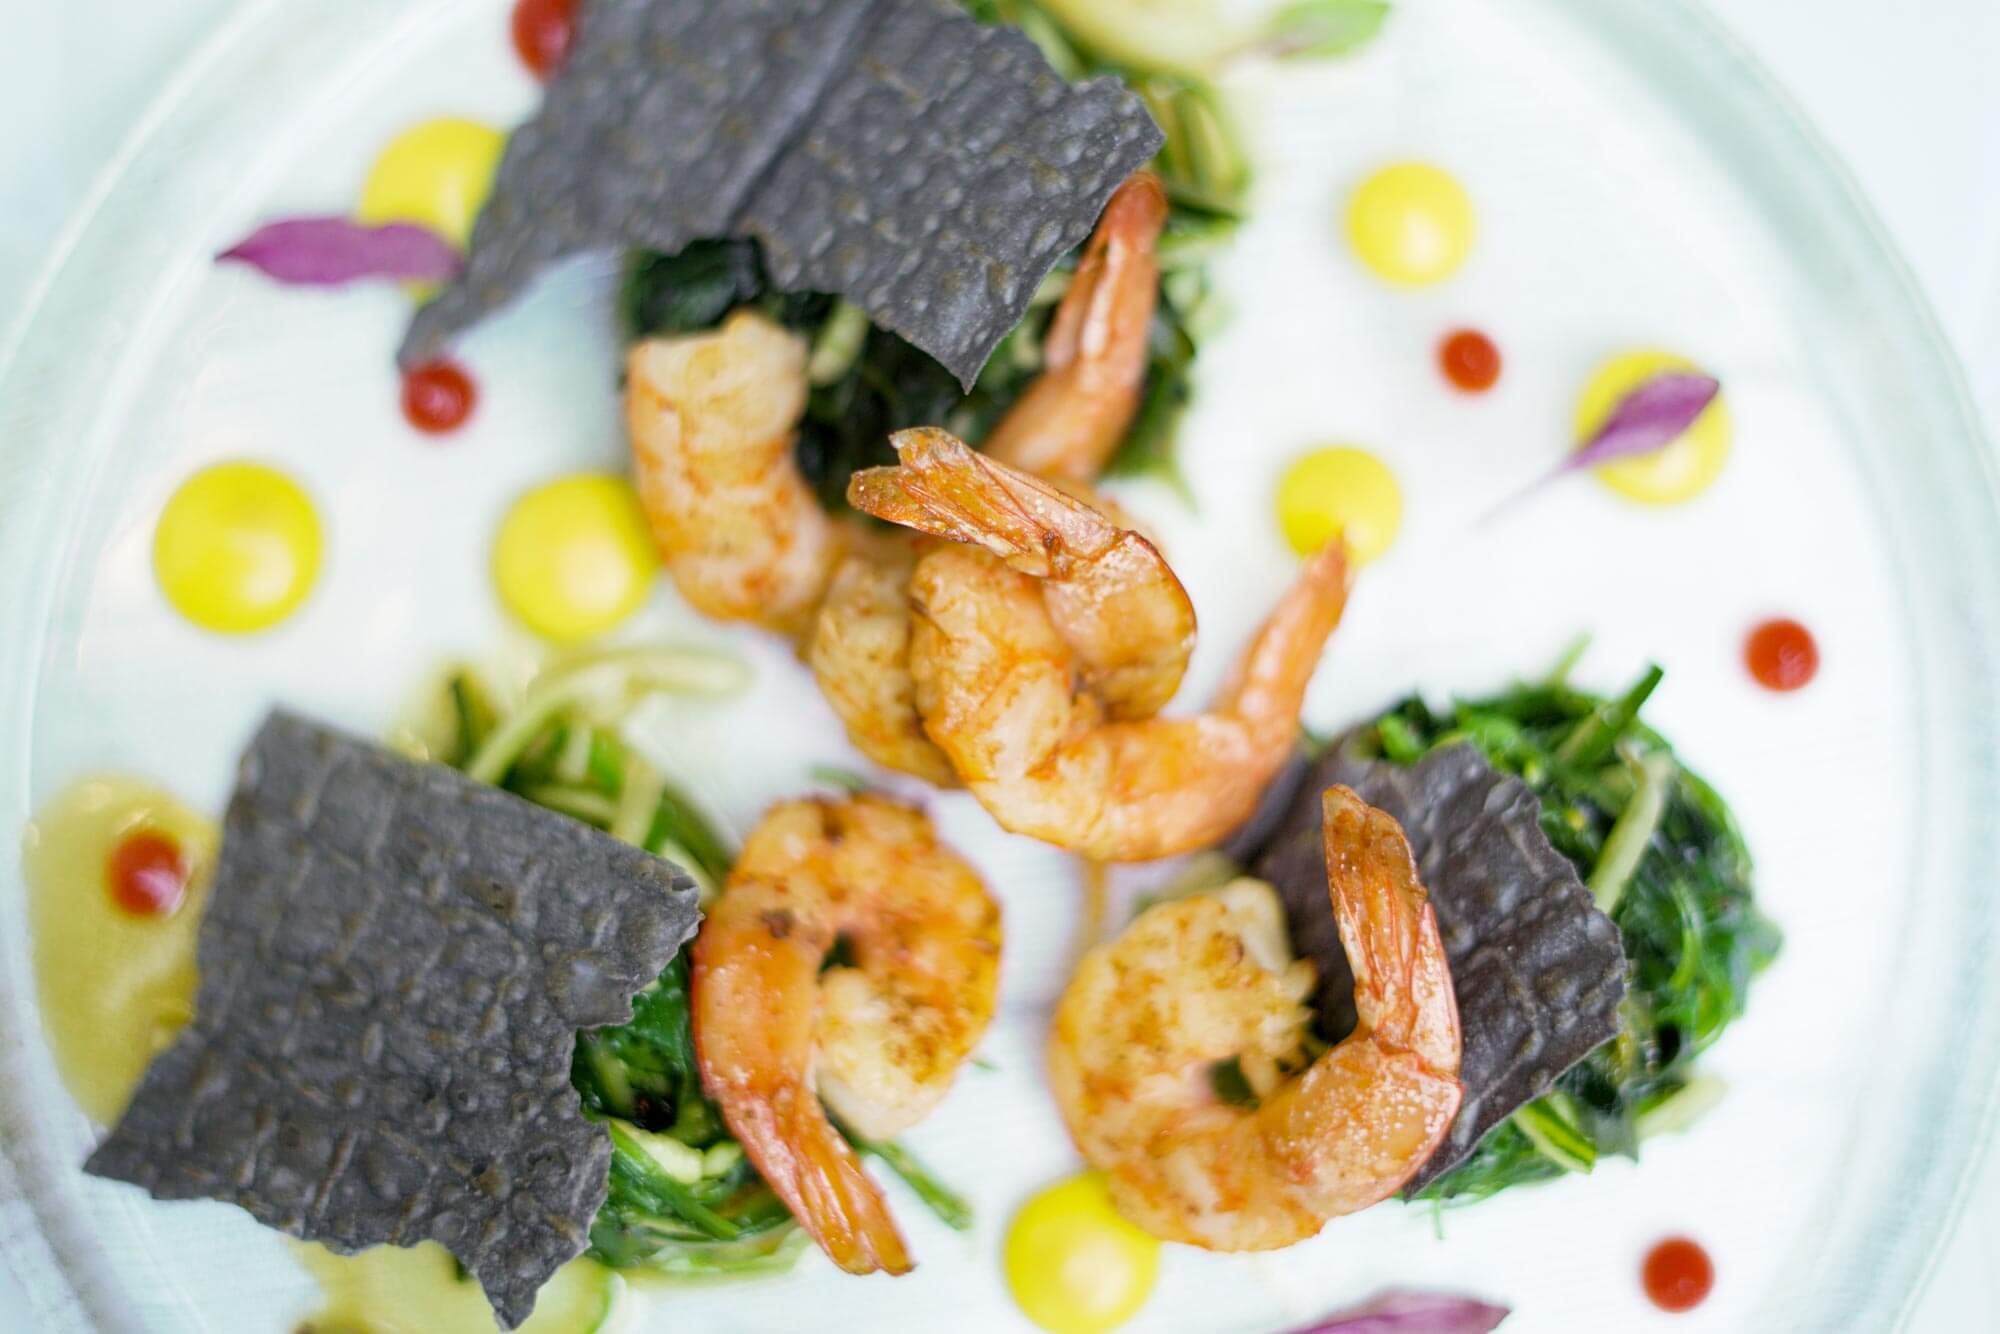 Shrimps with seaweed salad and passion fruit purée with coconut milk and curry